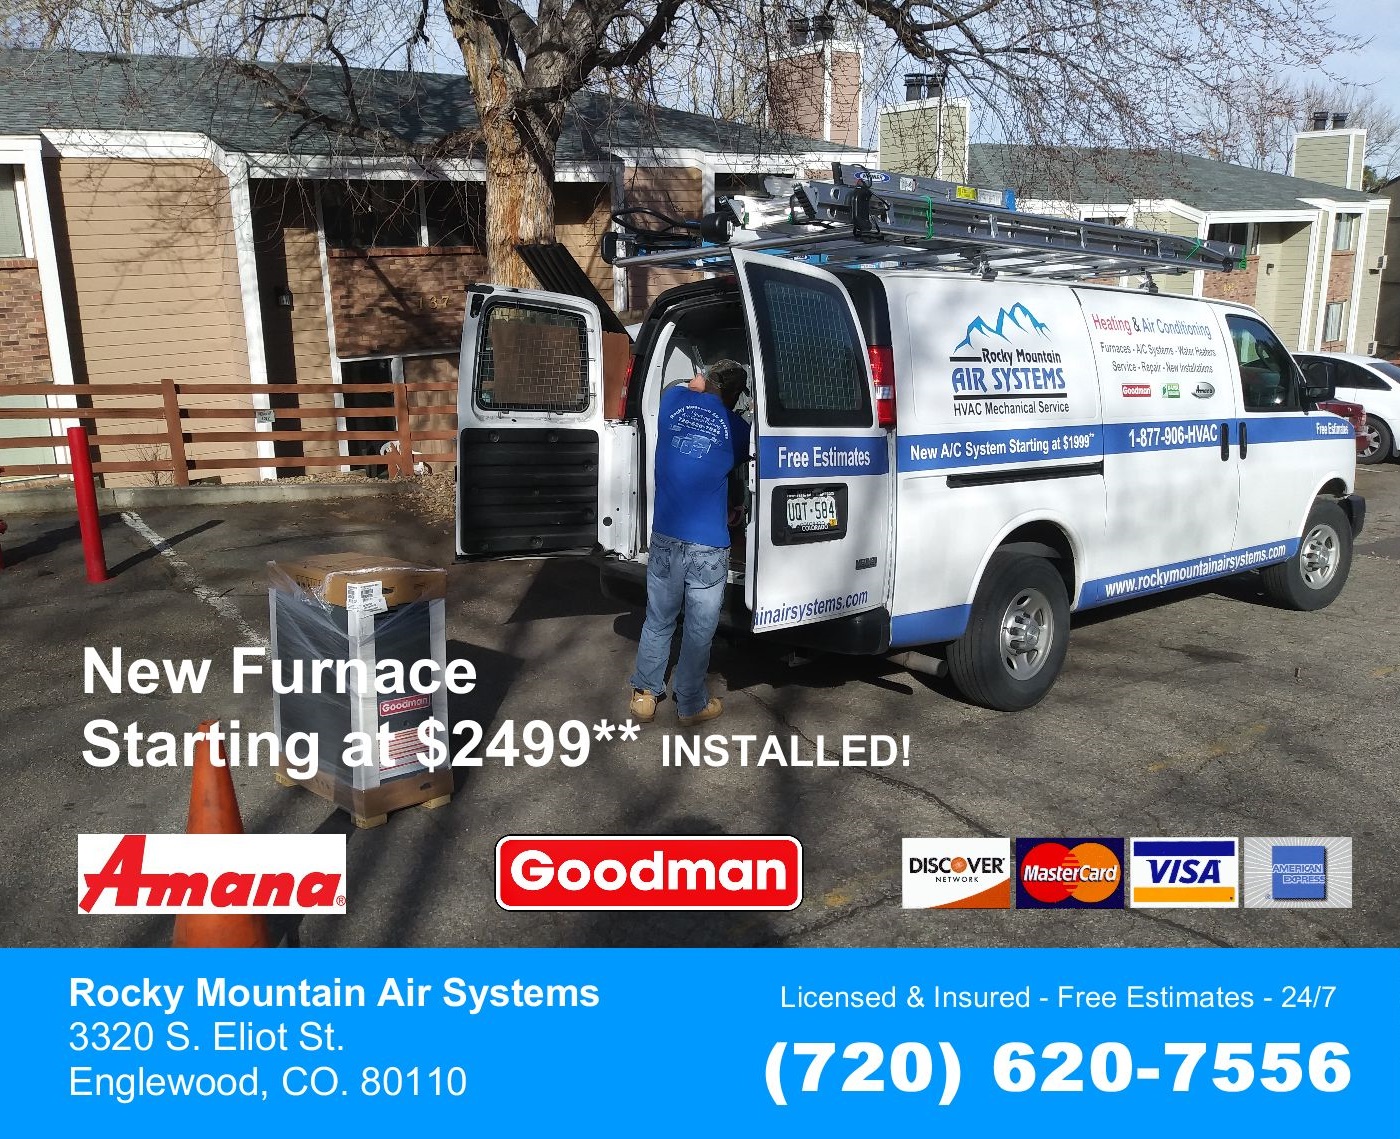 Heating and Air Conditioning - Rocky Mountain Air Systems - 24/7 - Free Estimates